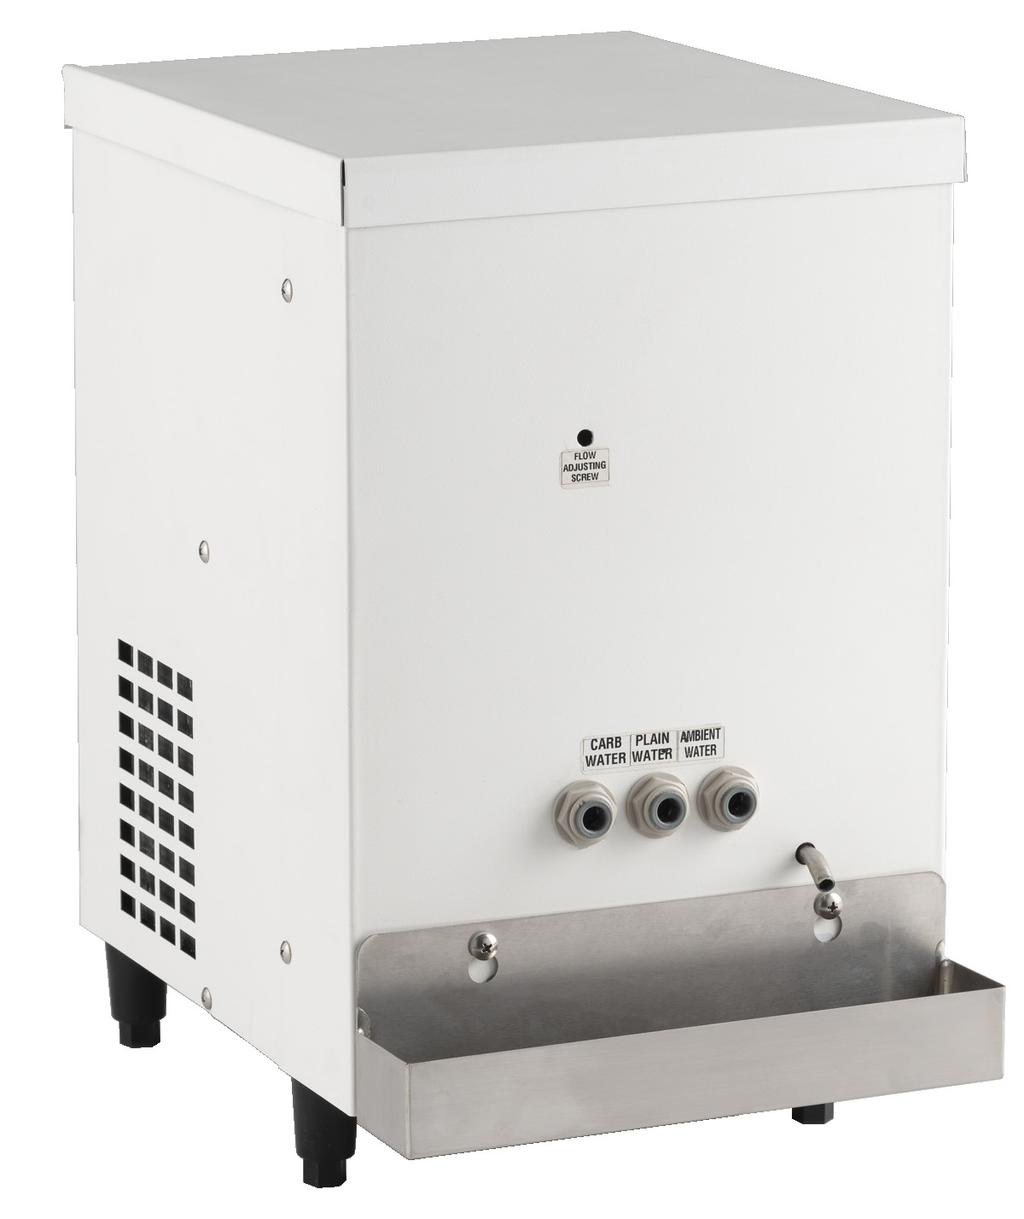 CP-JR-UC-BH Power Pack Proudly made in the USA, this in-cabinet mounted chiller has a high capacity refrigeration system with an